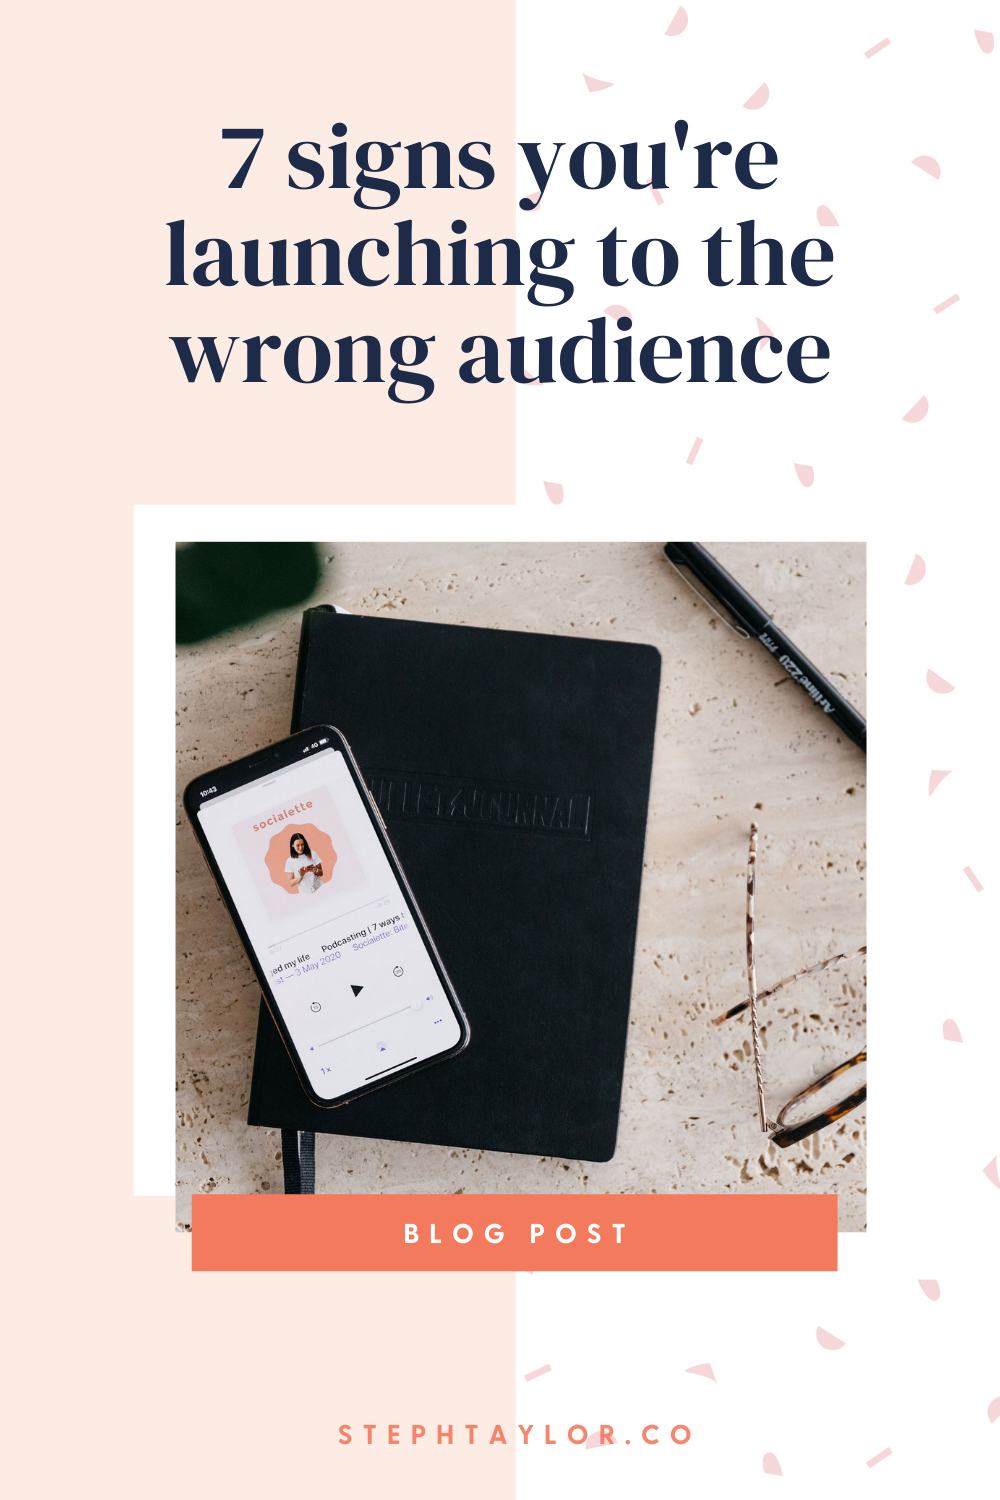 7 signs launching to the wrong audience